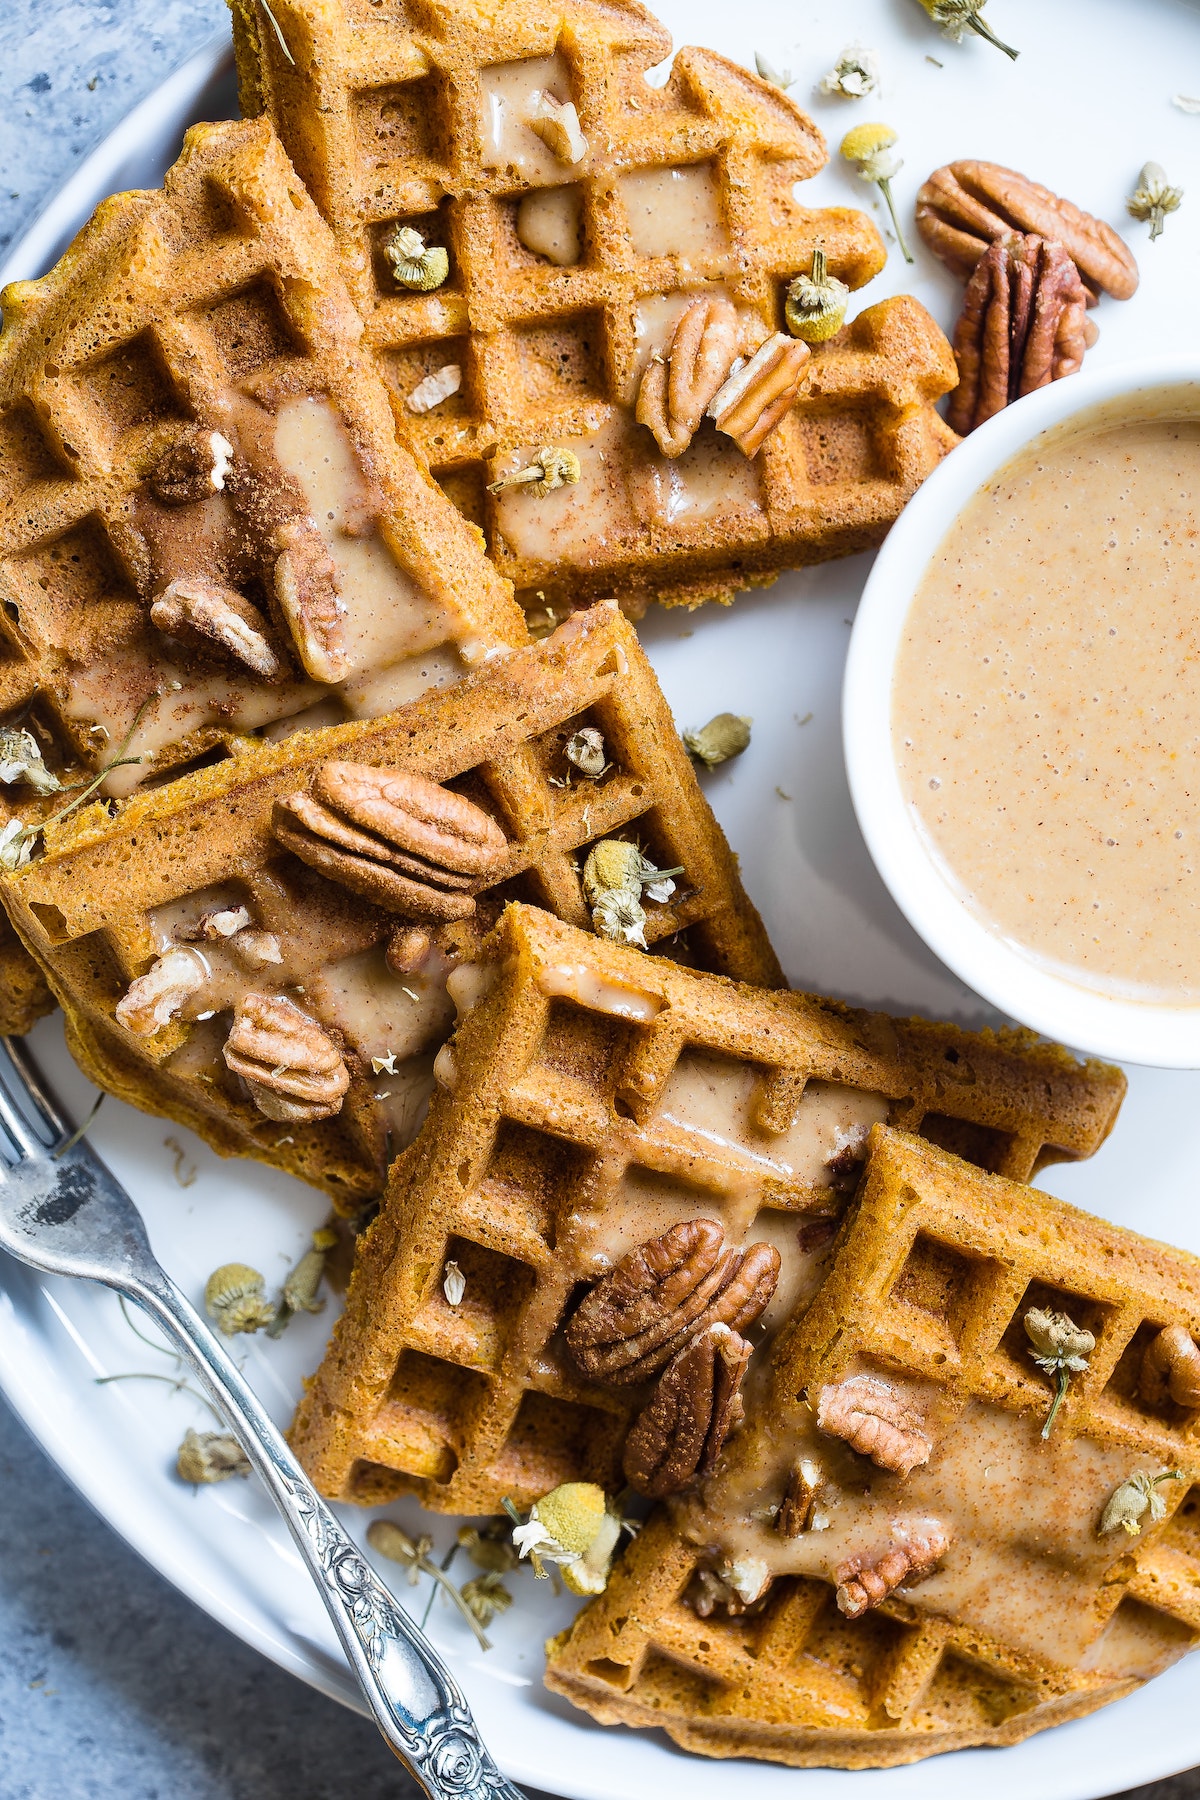 Overhead shot of waffles sprinkled with nuts next to a small cup of light brown sauce.